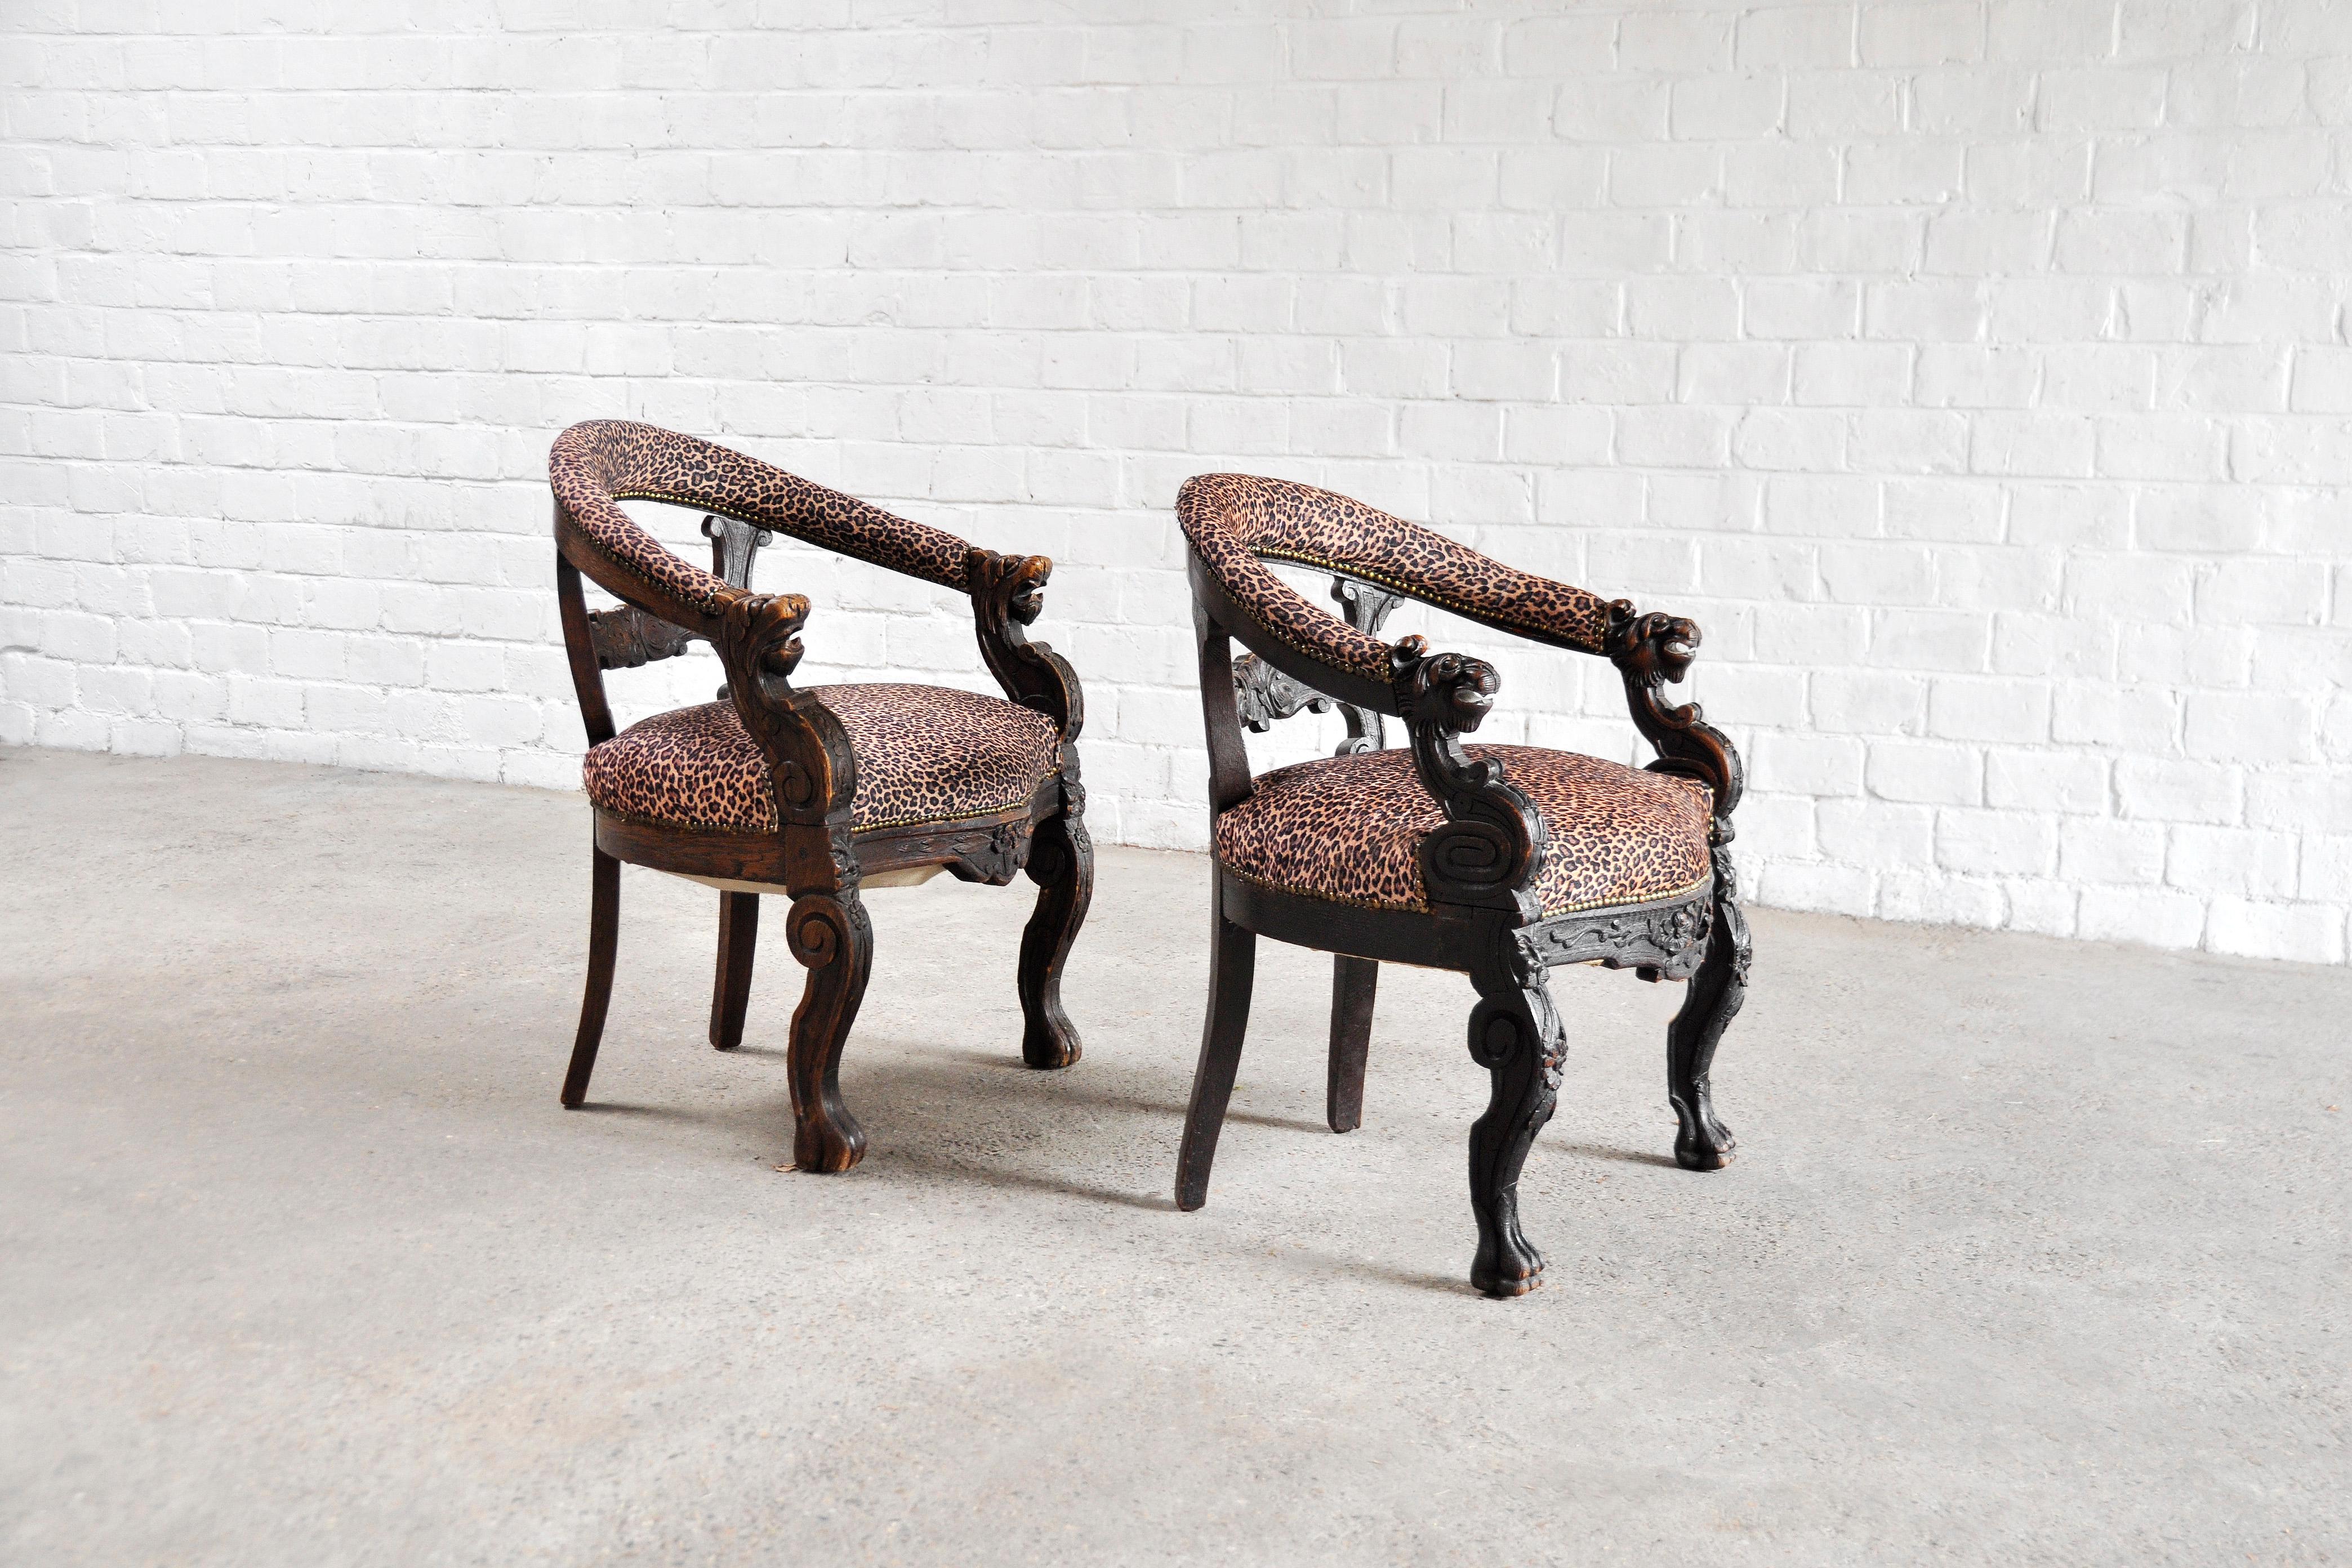 Late 19th Century 19th Century Carved Oak Tub Chairs with Leopard Print Upholstery, Set of 2 For Sale